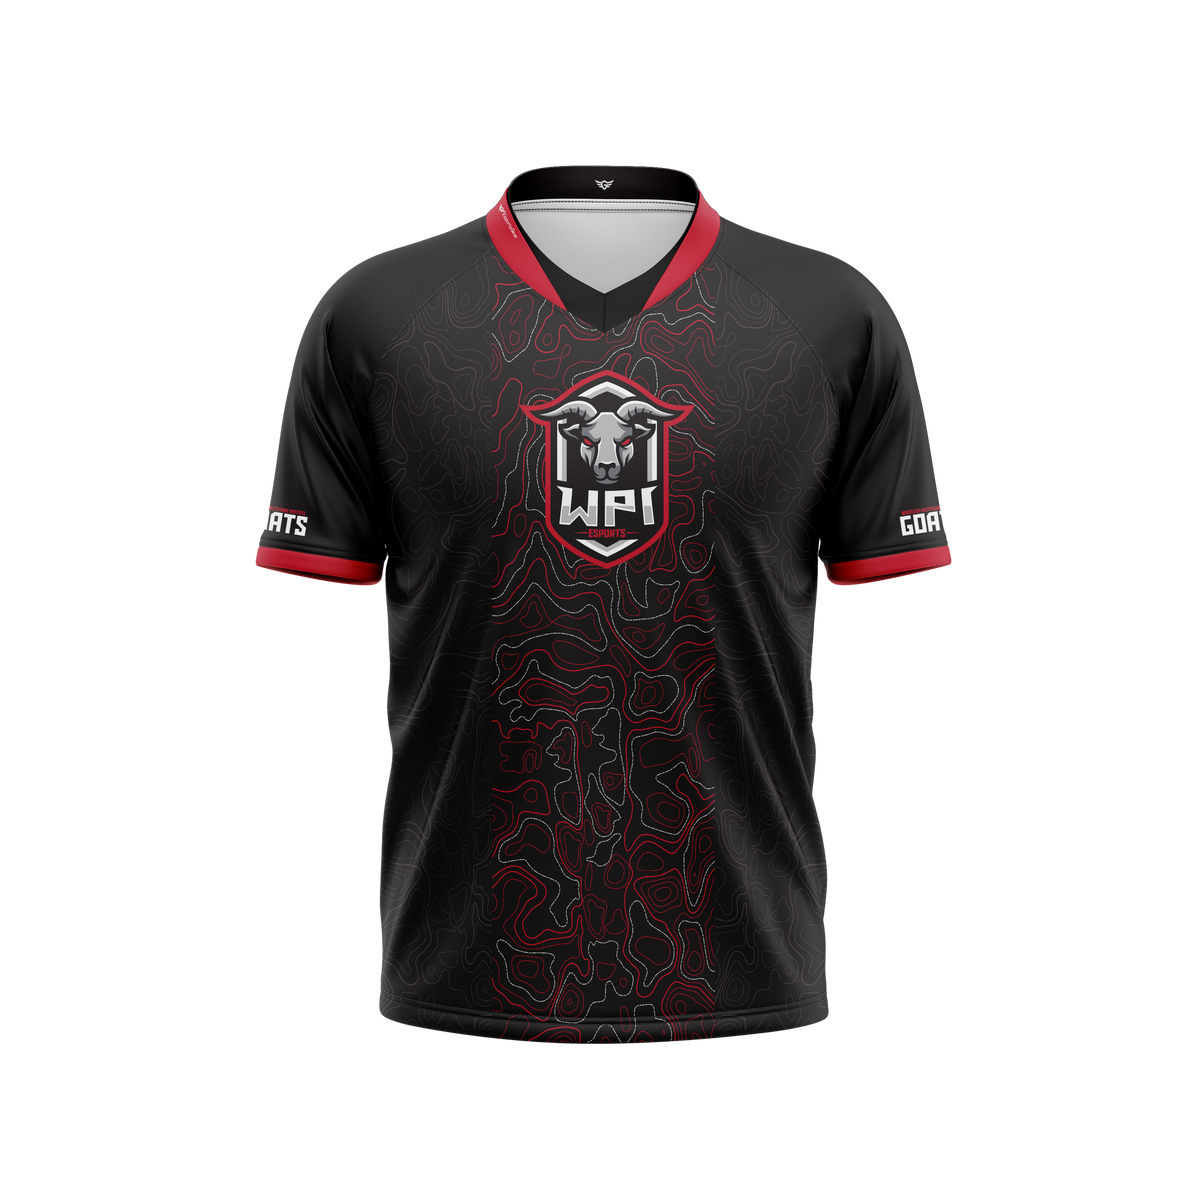 Worcester Polytechnic Institute Jersey